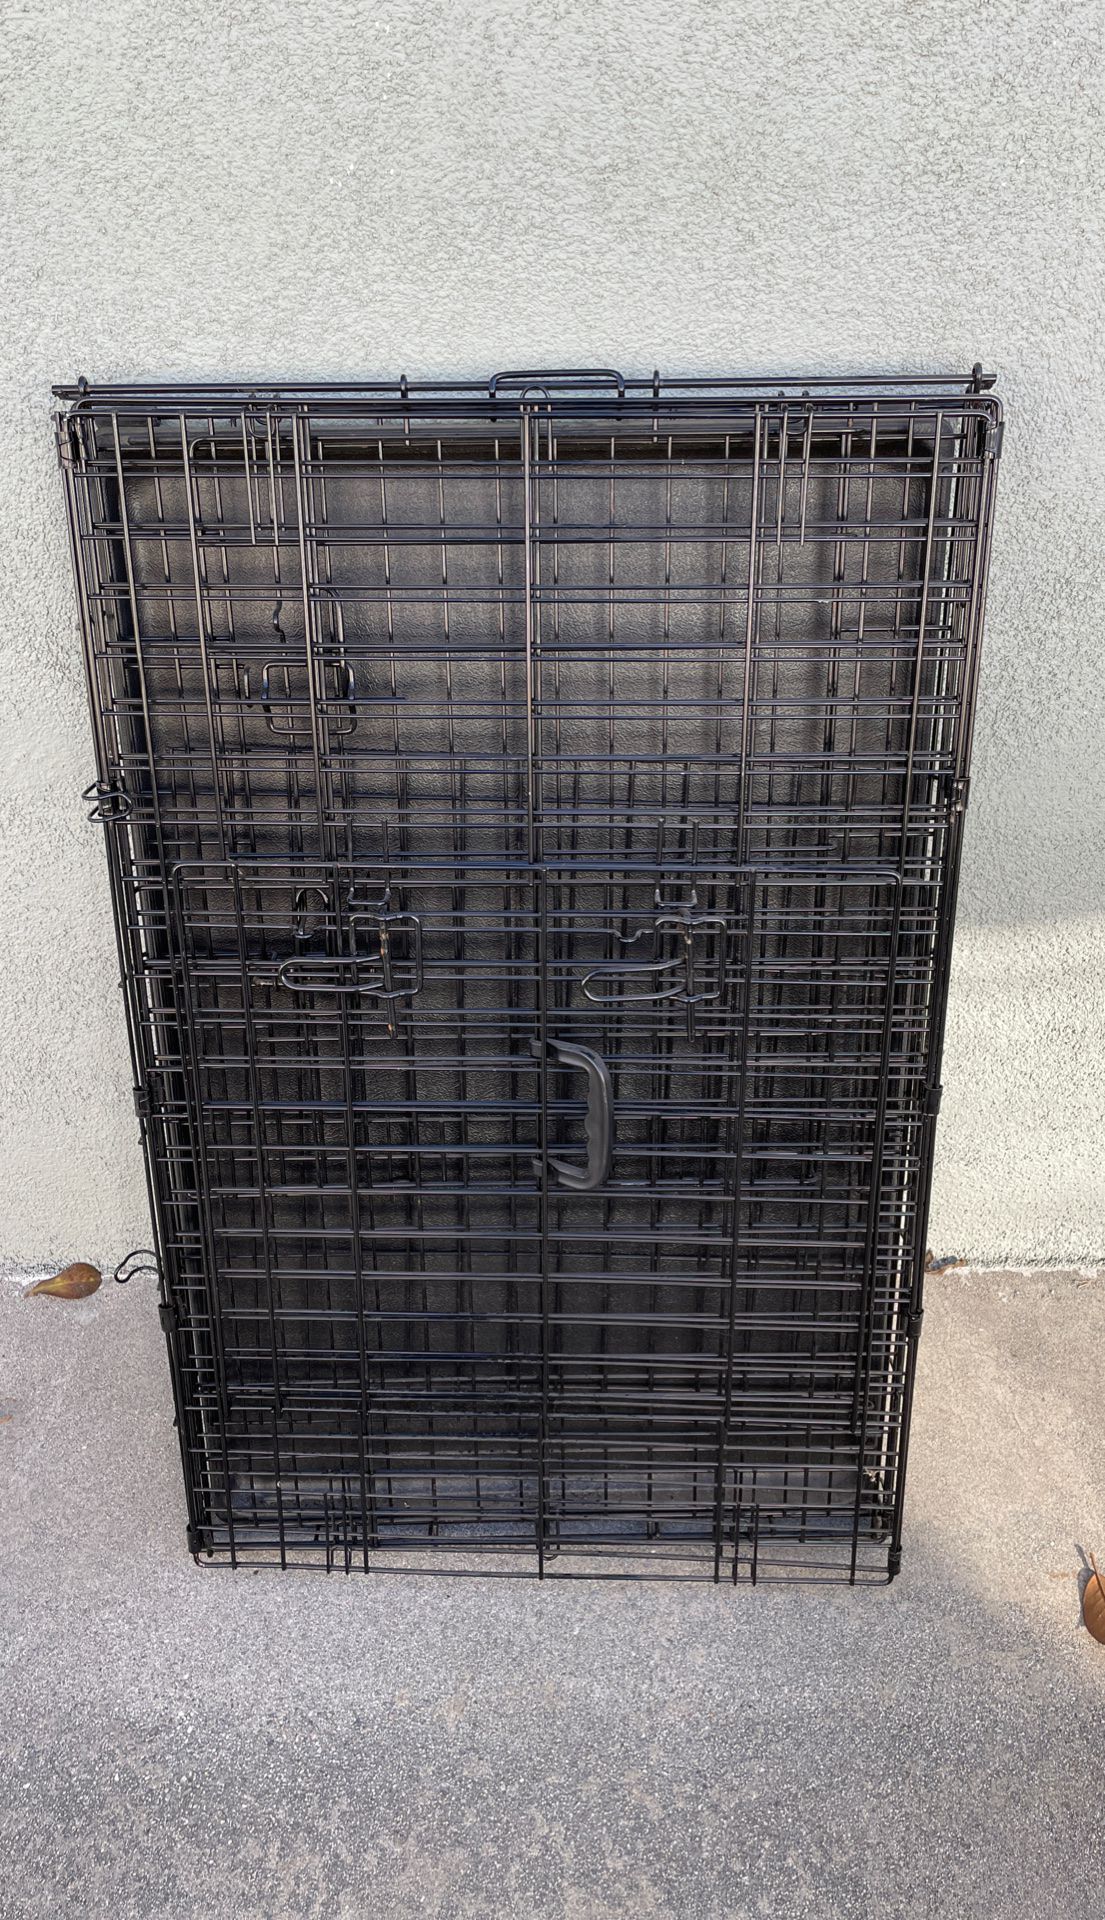 Dog crate approximately 24”x36”